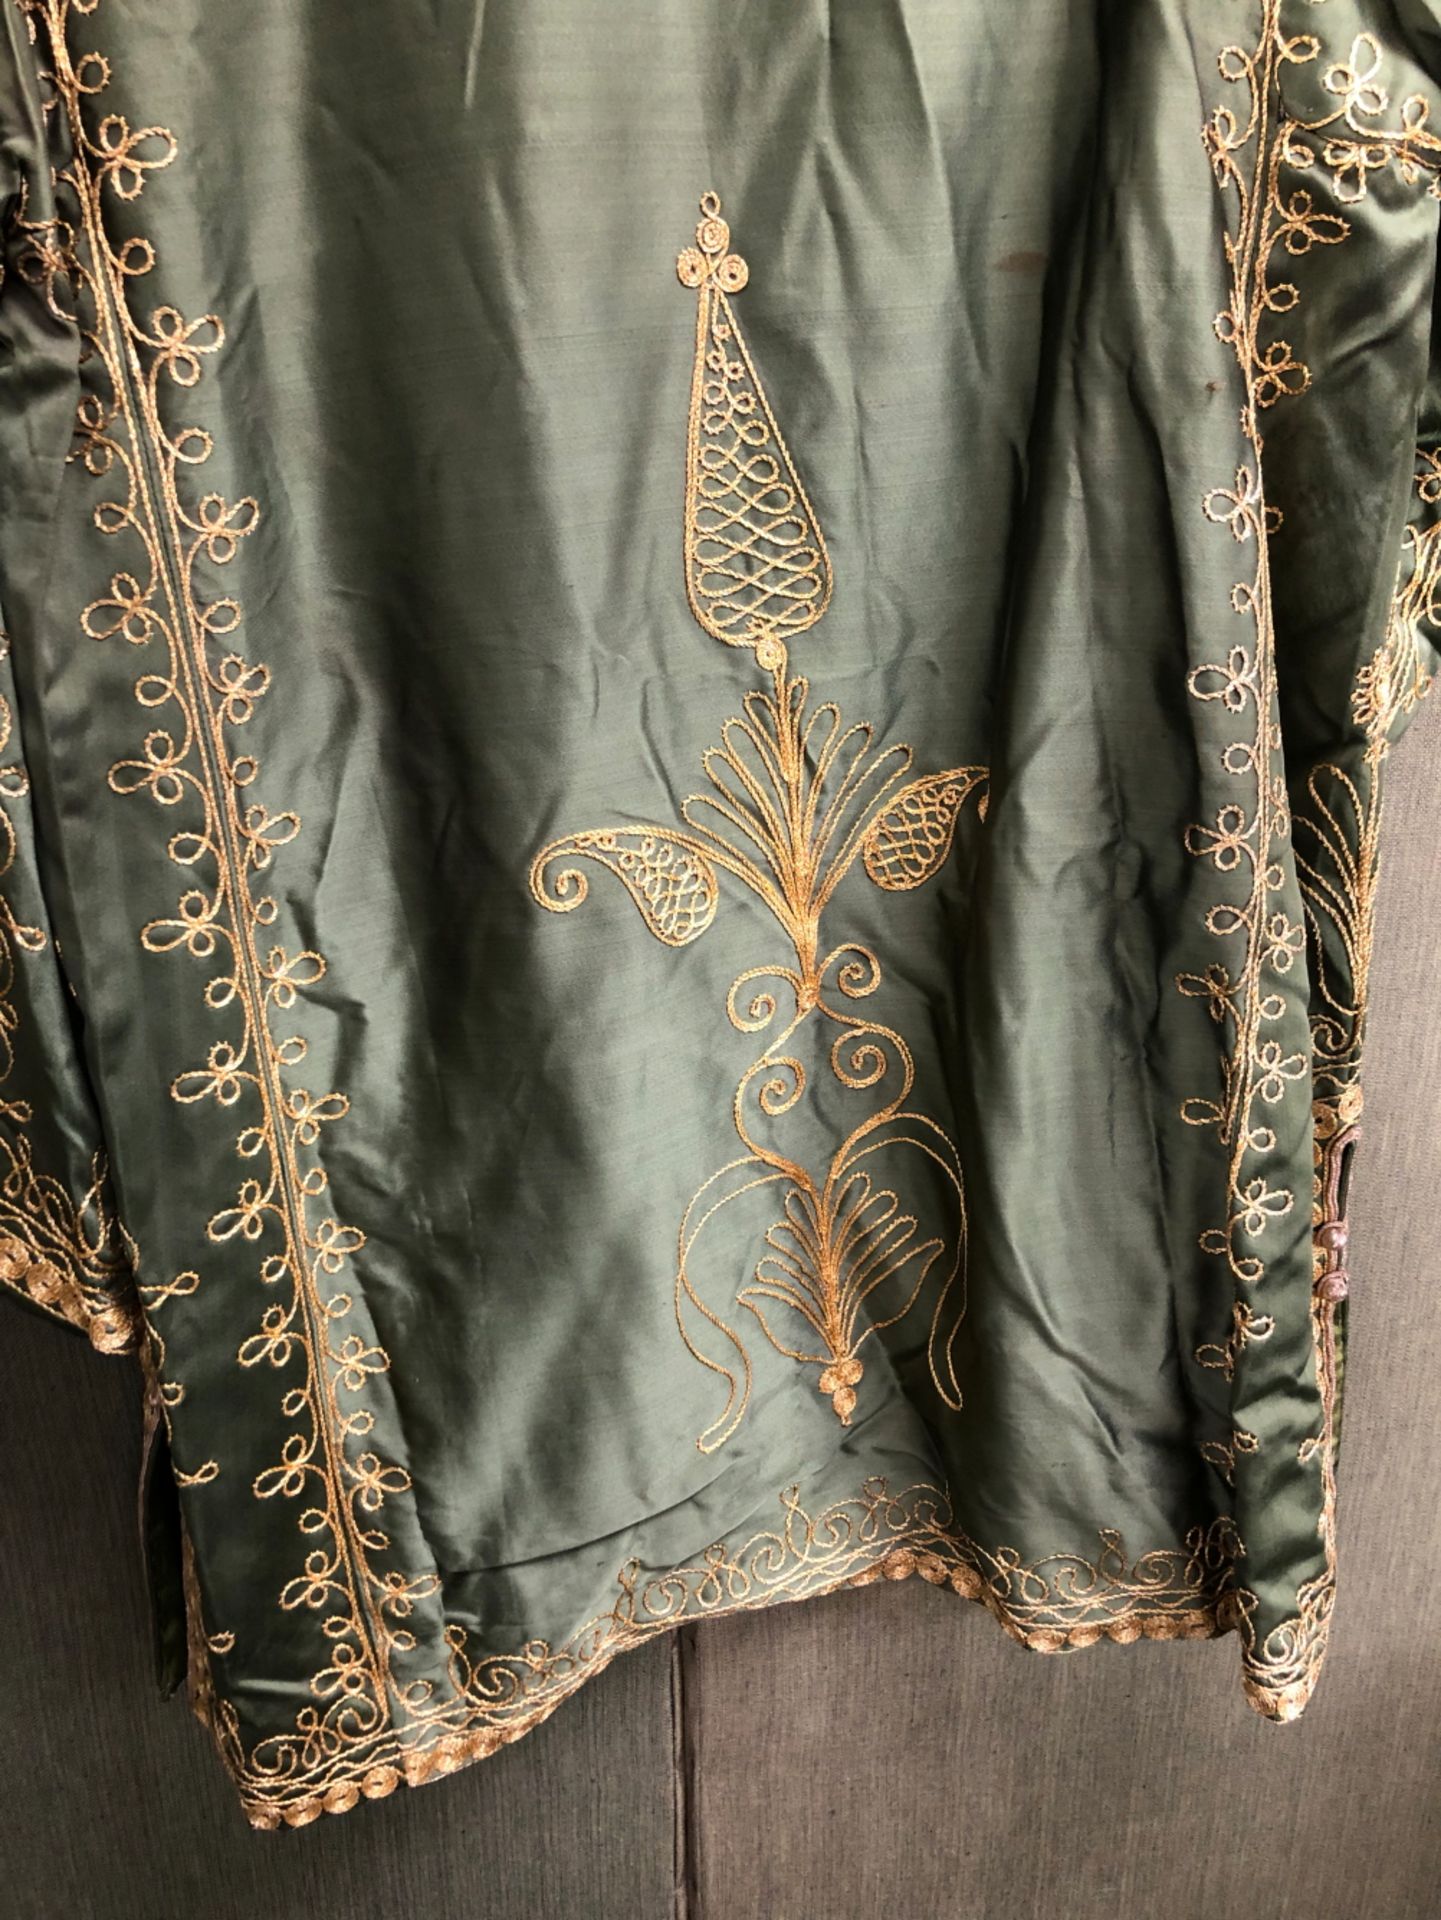 JACKET, AN INDIAN GREEN SILK JACKET EMBROIDERED IN GOLD THREAD, SLEEVE LENGTH 48cms, NECK TO HEM - Image 7 of 10